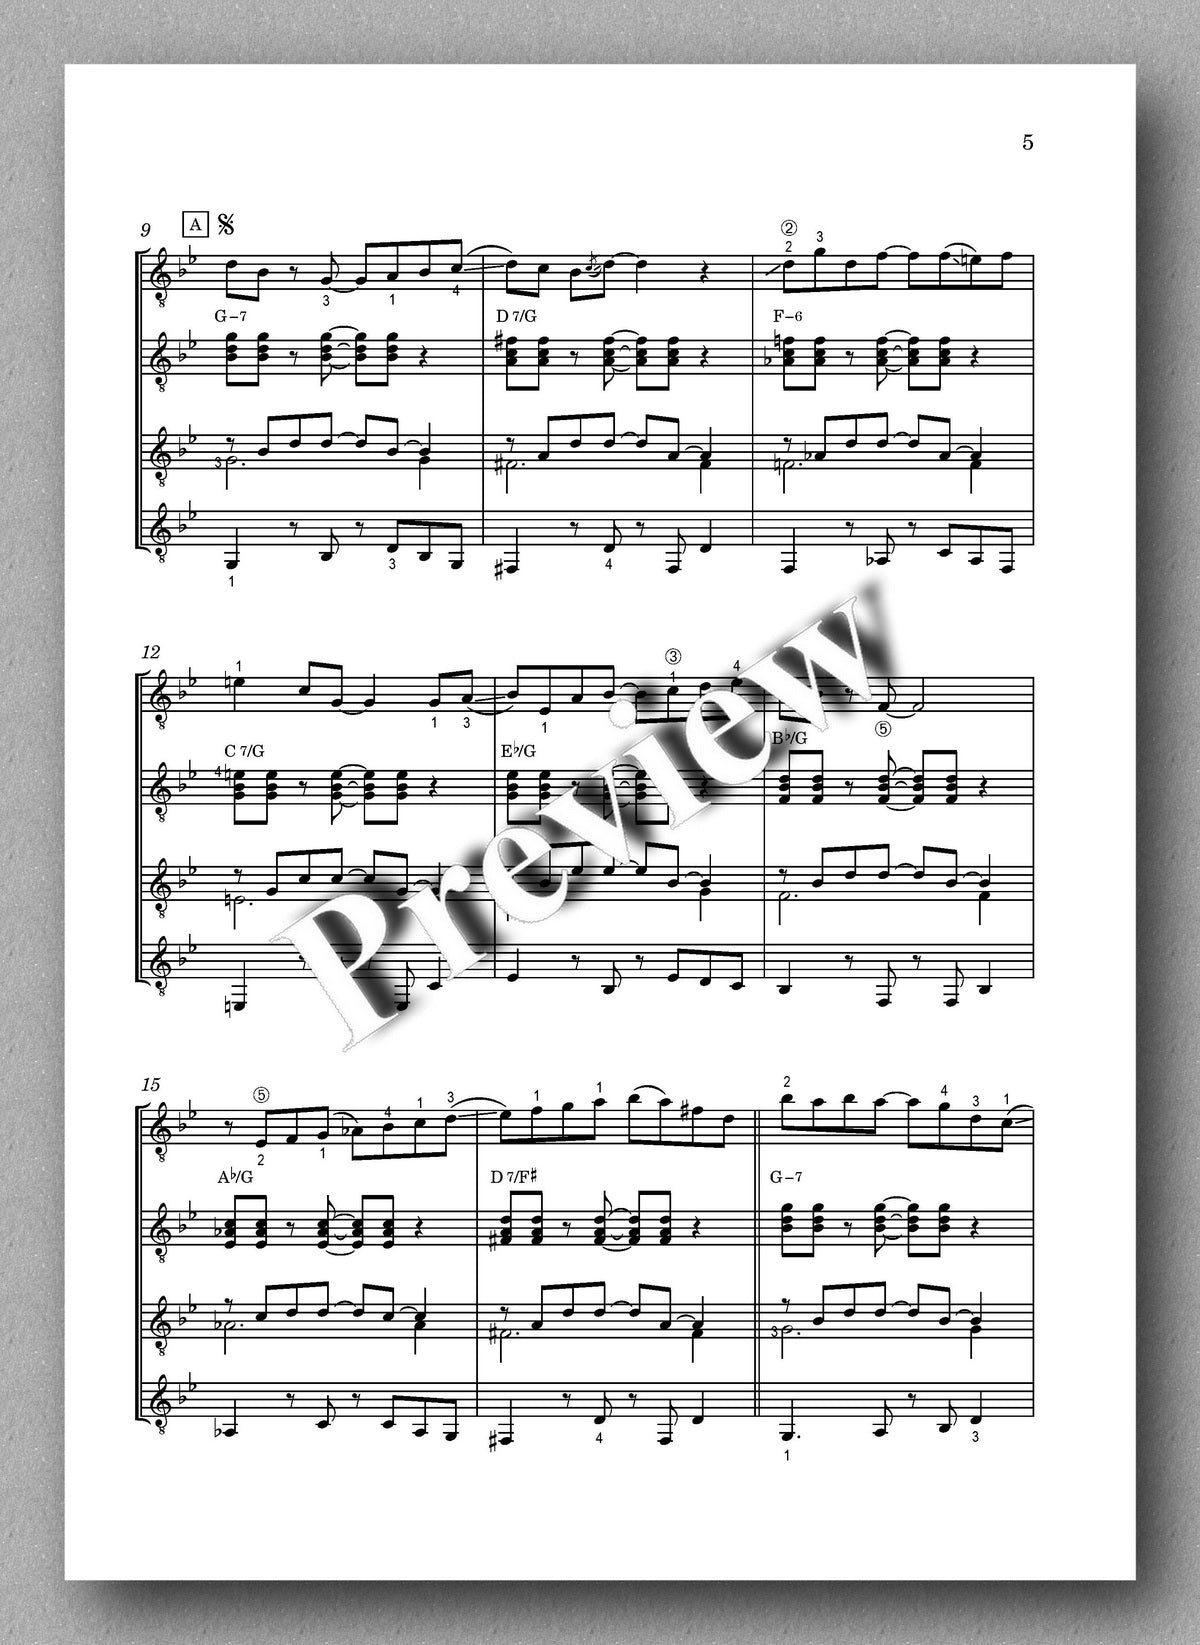 Petrov, Today Or Tomorrow - music score 2